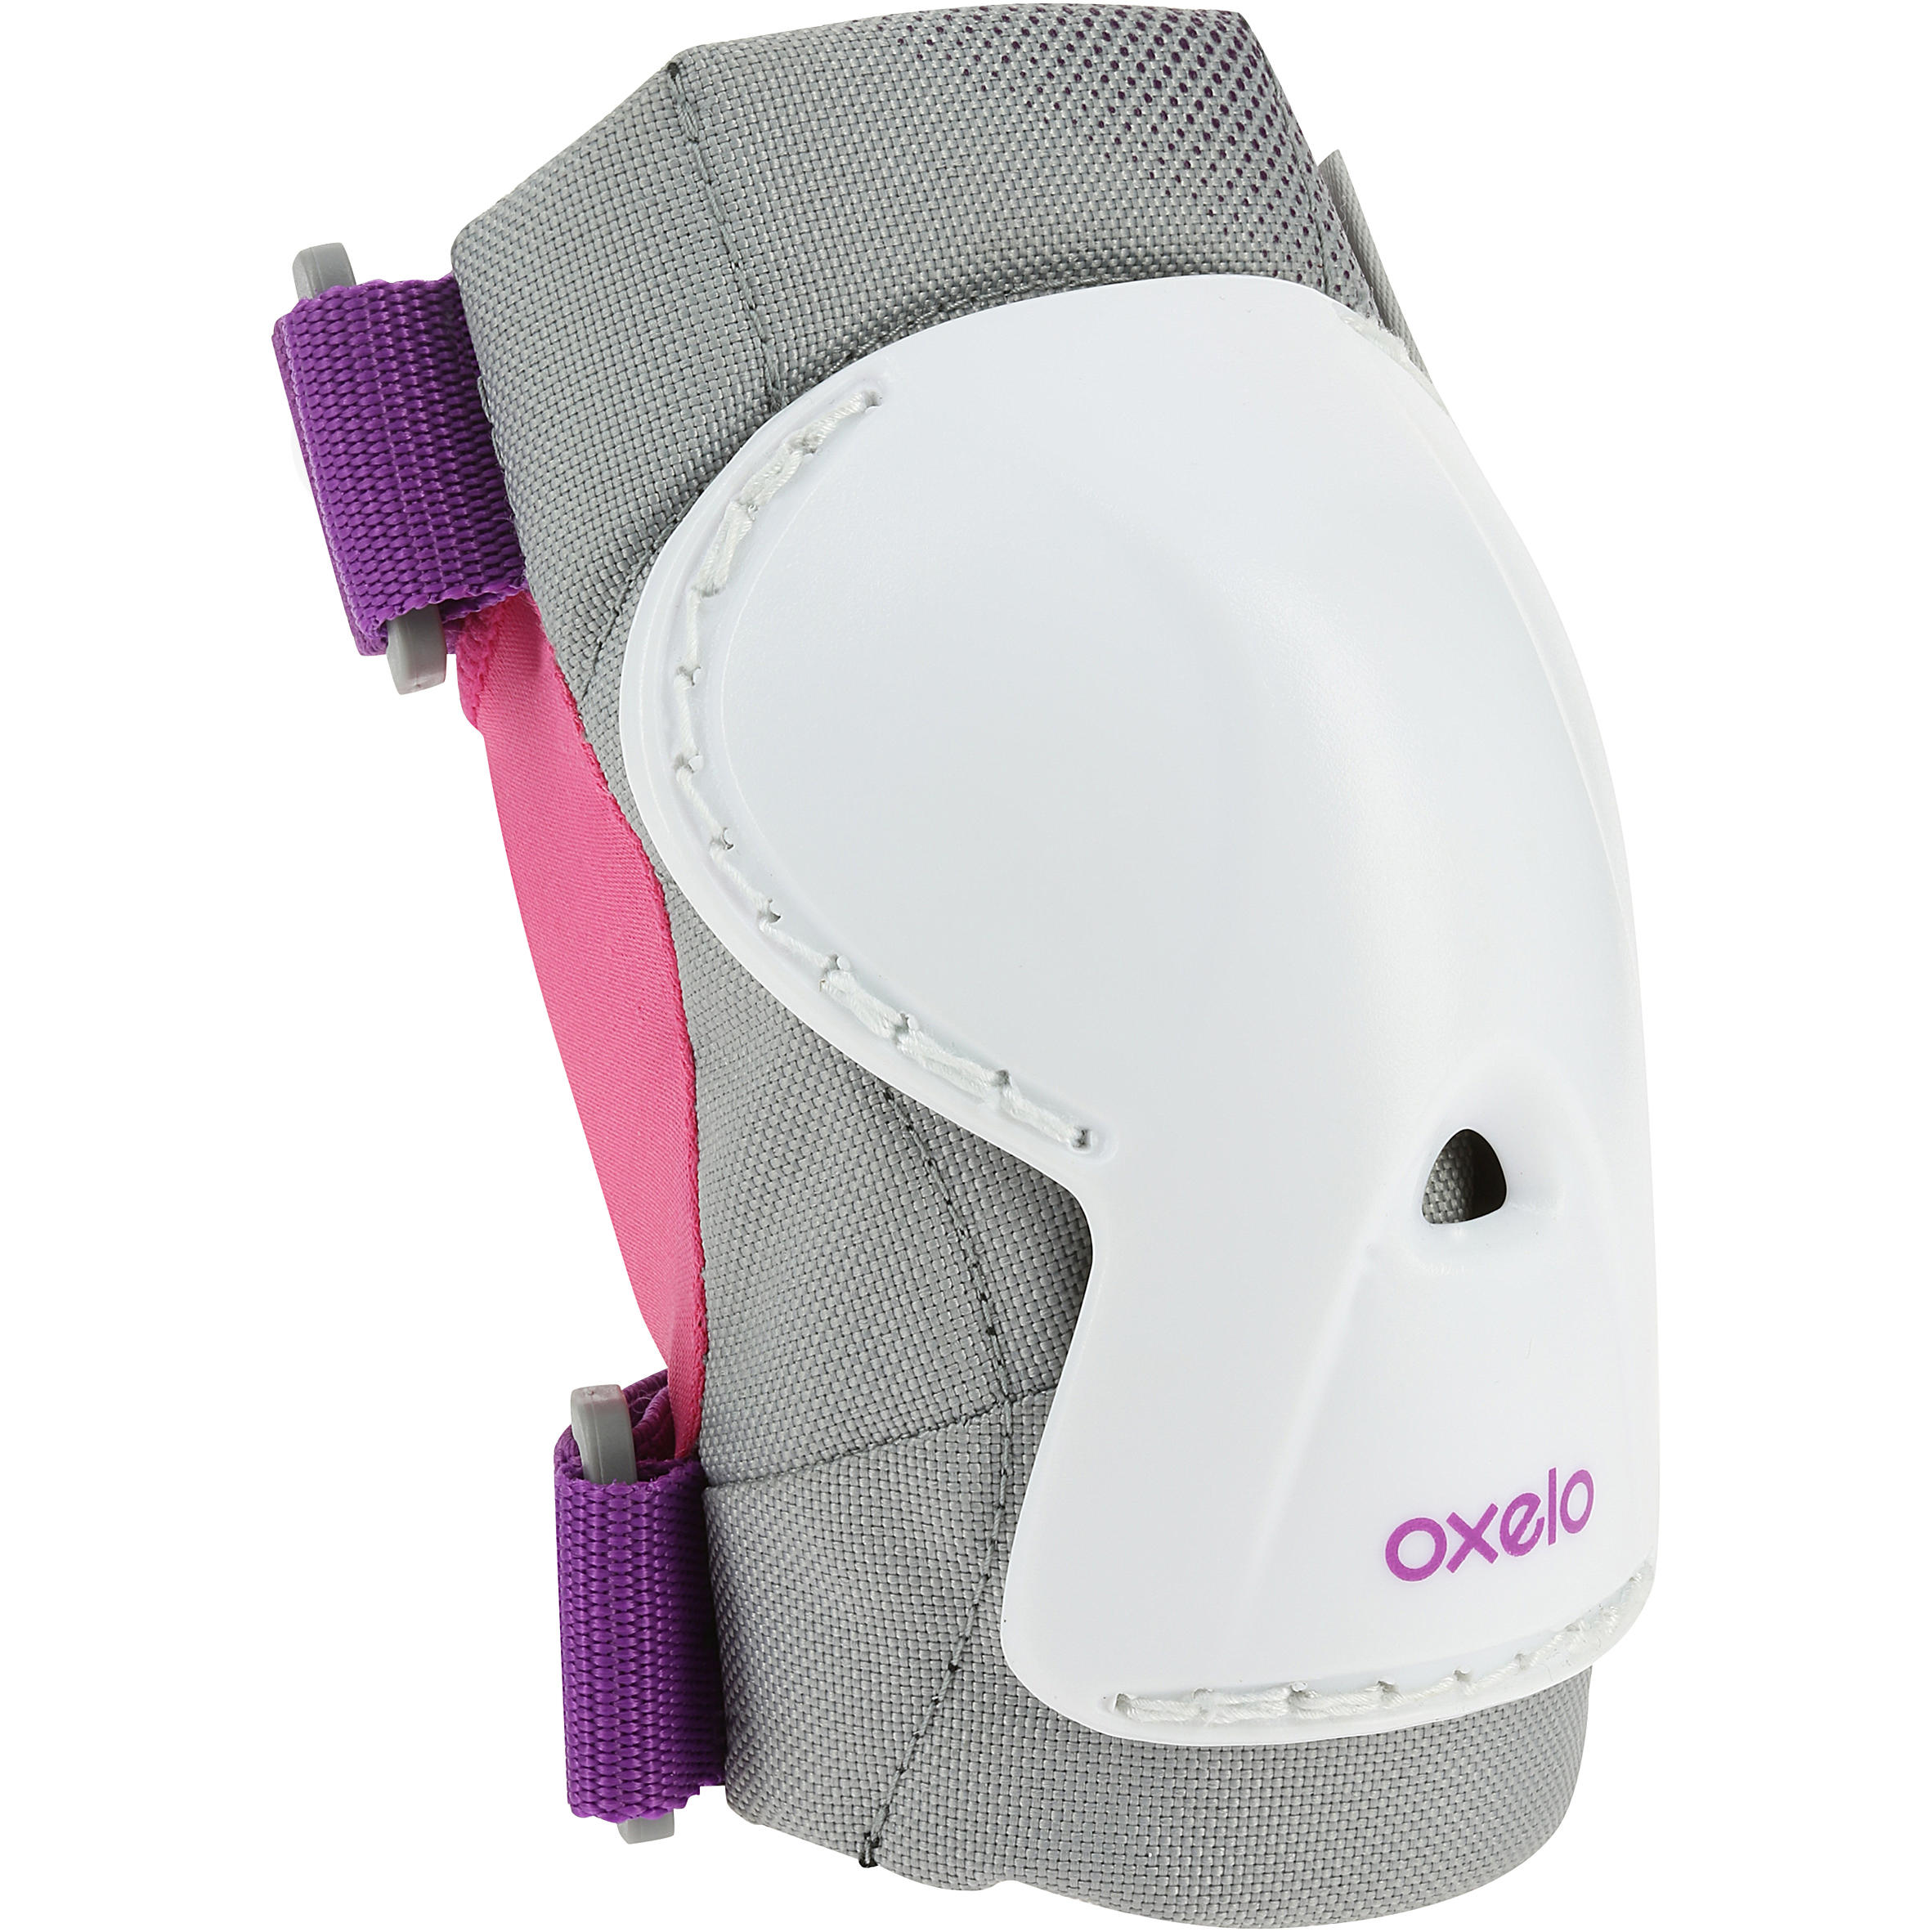 Play Kids' 3-Piece Skating Skateboarding Scooter Protective Gear - Purple 2/9